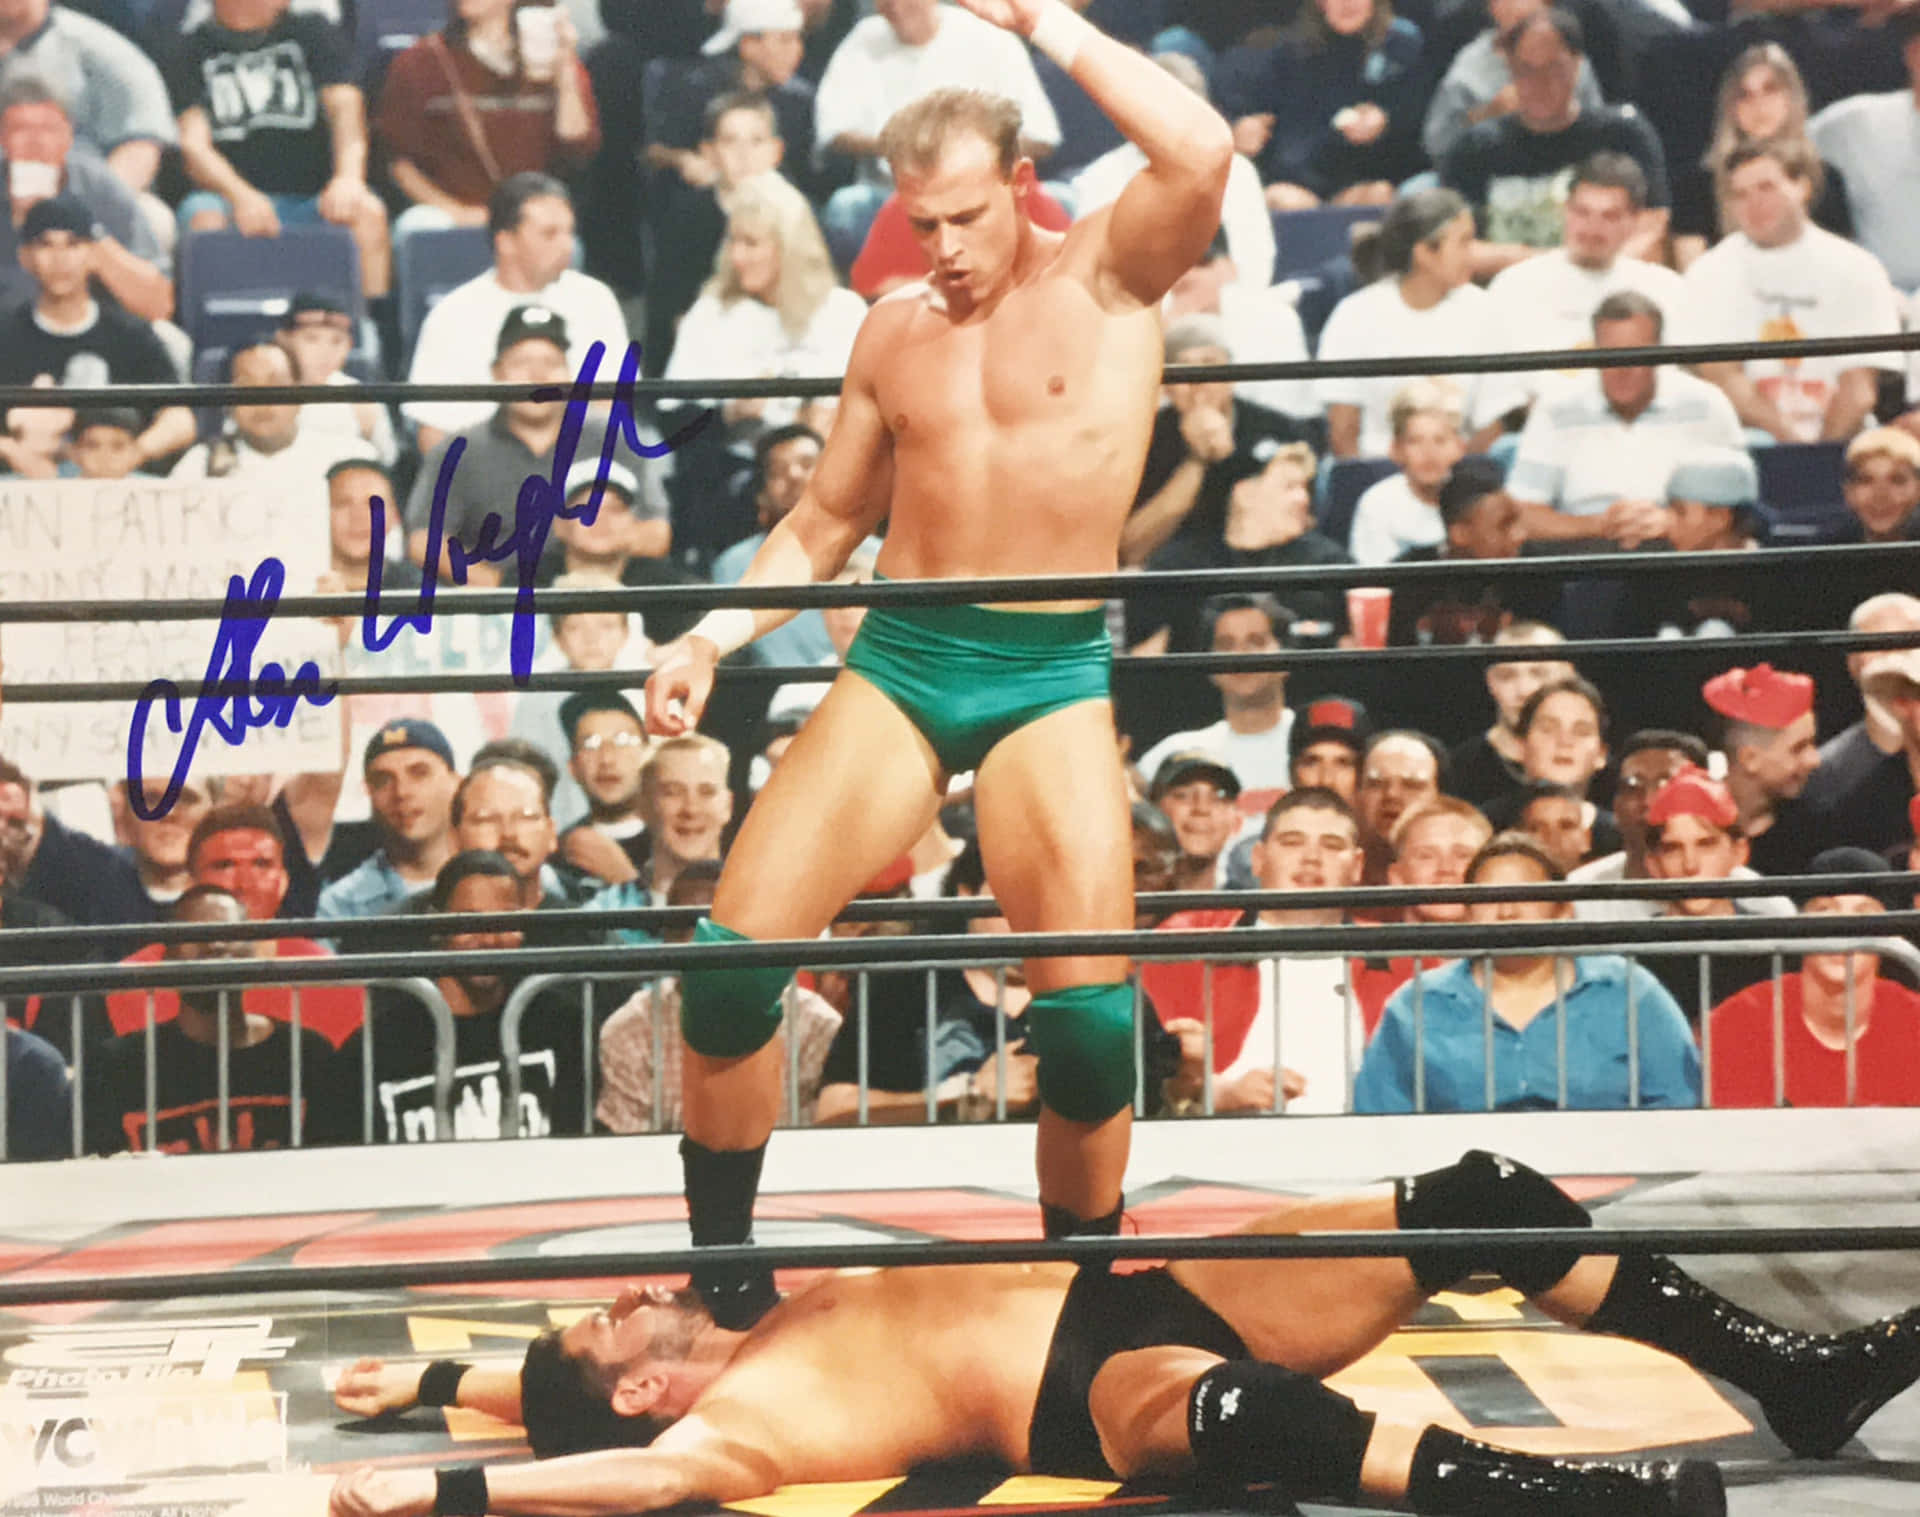 Autographed Photo of Alex Wright Wallpaper